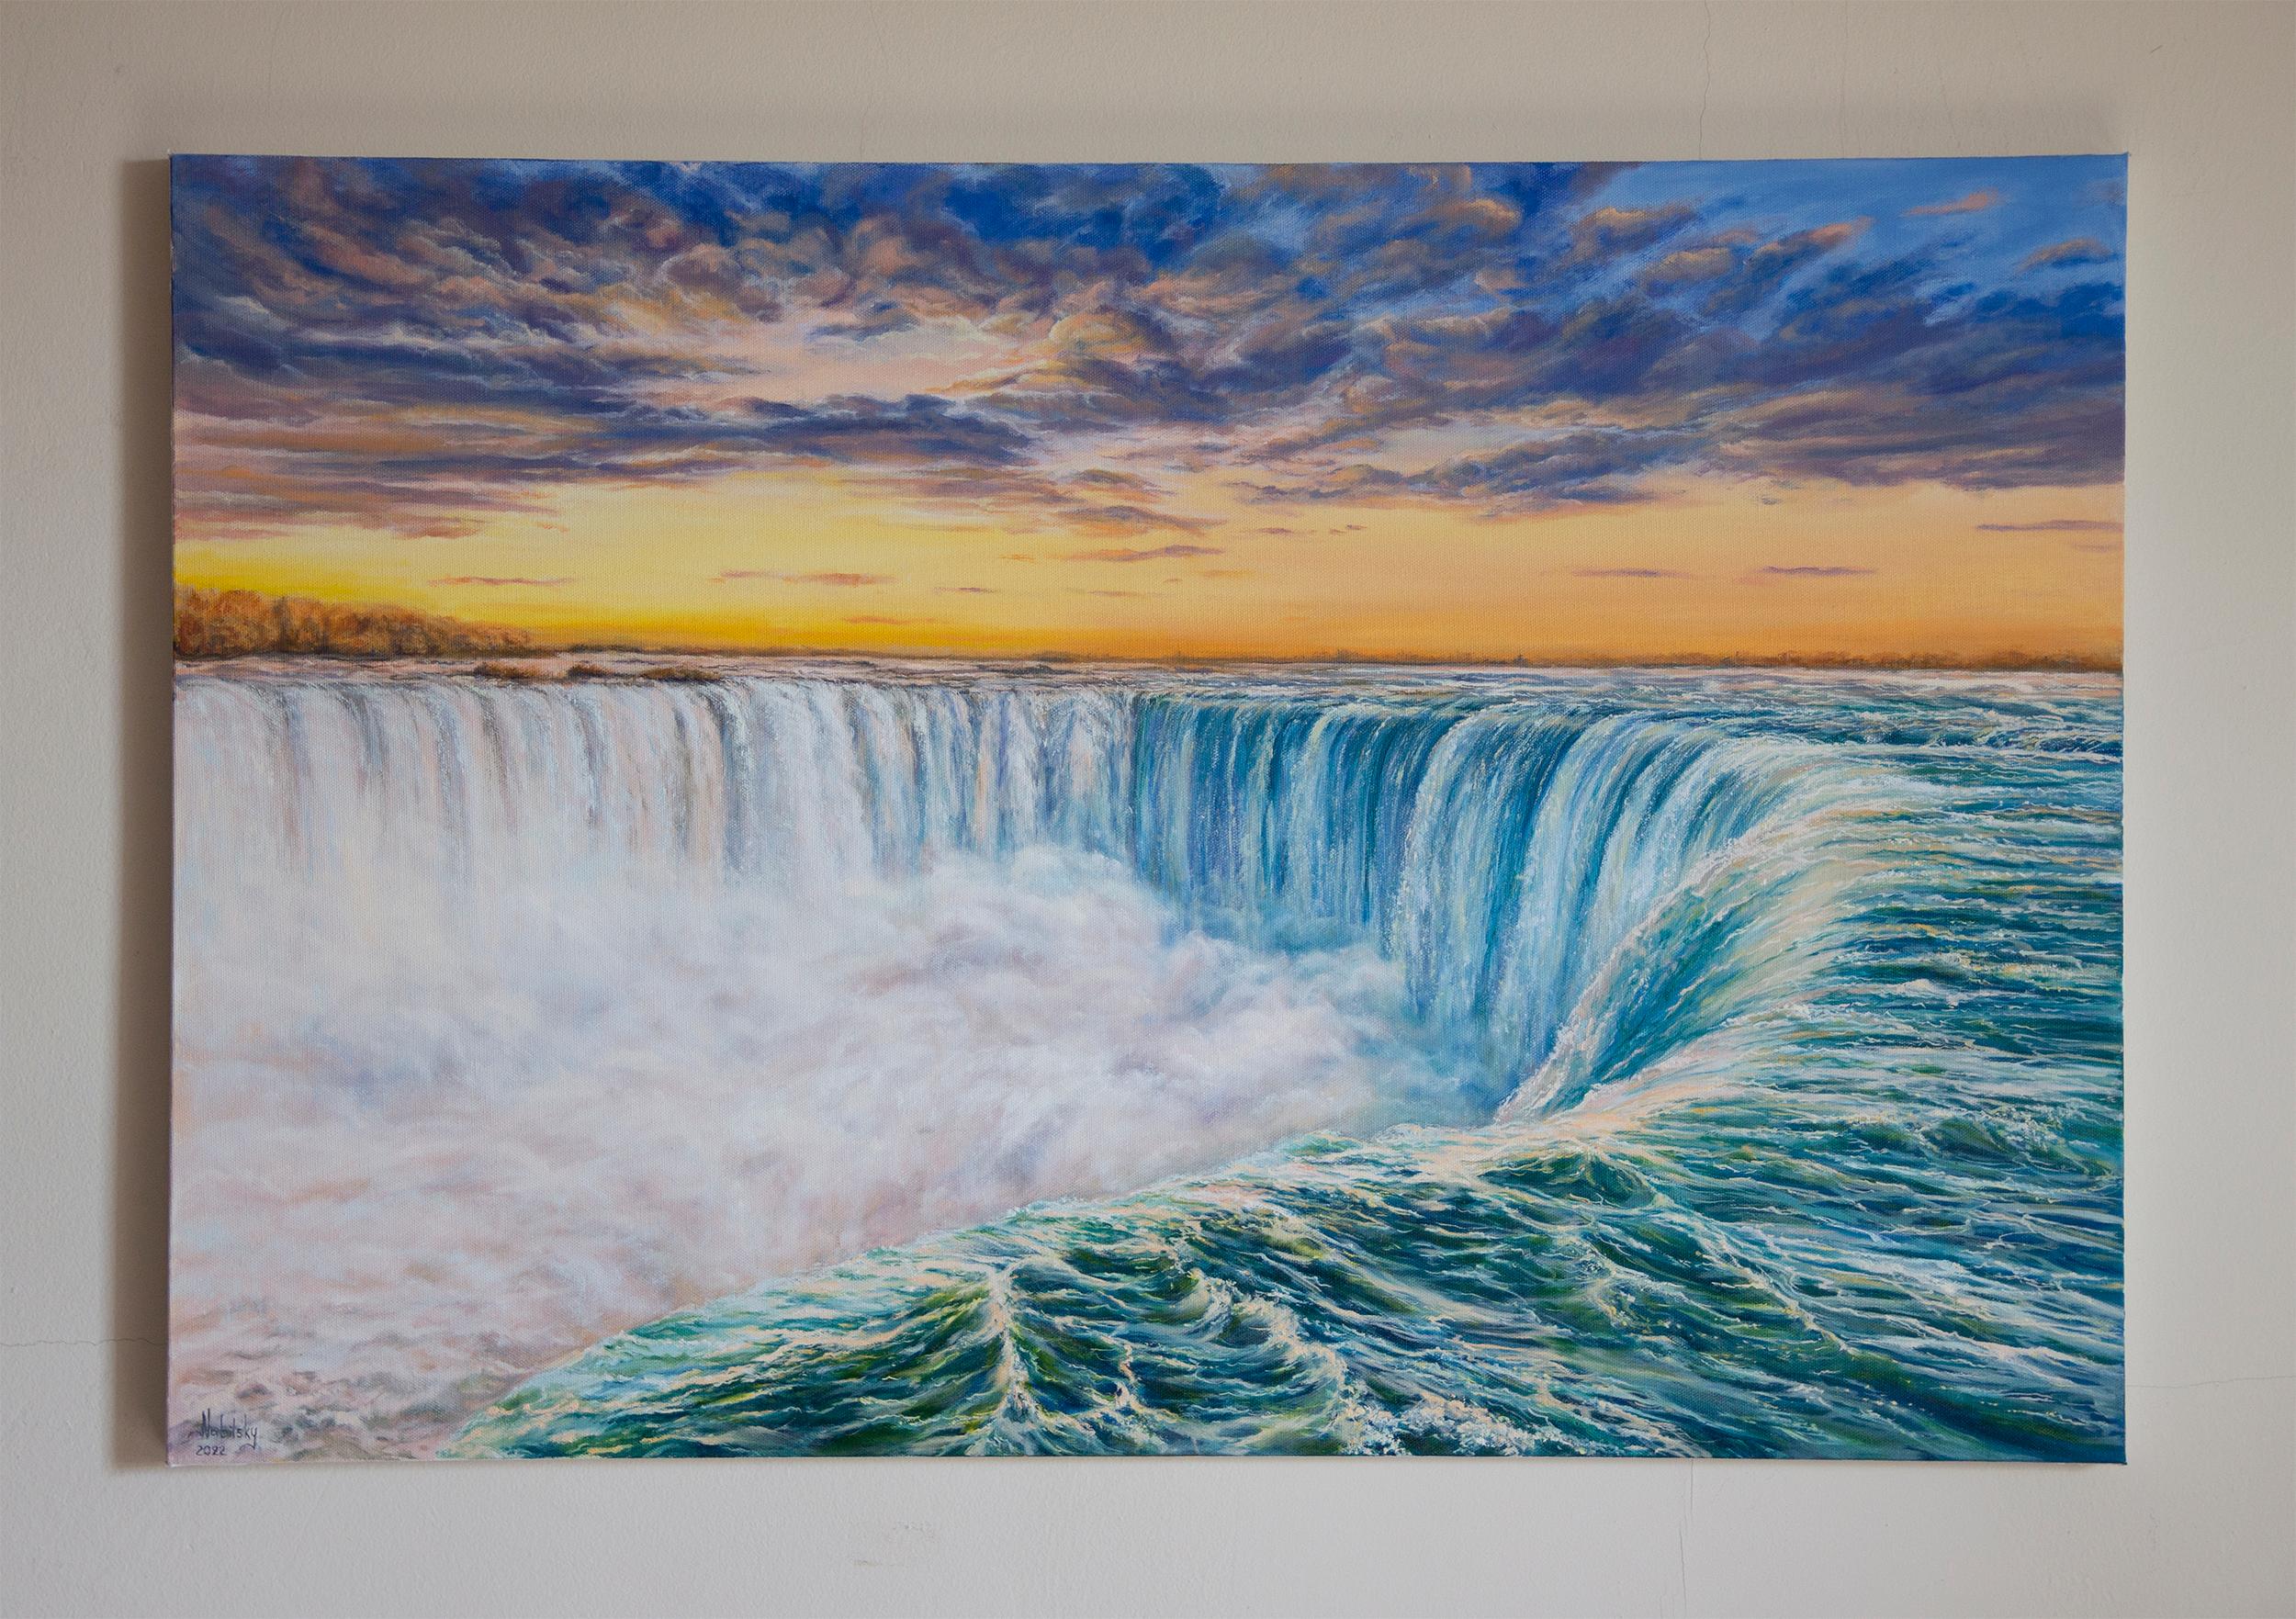 <p>Artist Comments<br>The breathtaking sight of Niagara Falls captures the mesmerizing fusion between the cascading waters below and the enchanting twilight sky above. According to artist Olena Nabilsky, once you witness this natural wonder, the